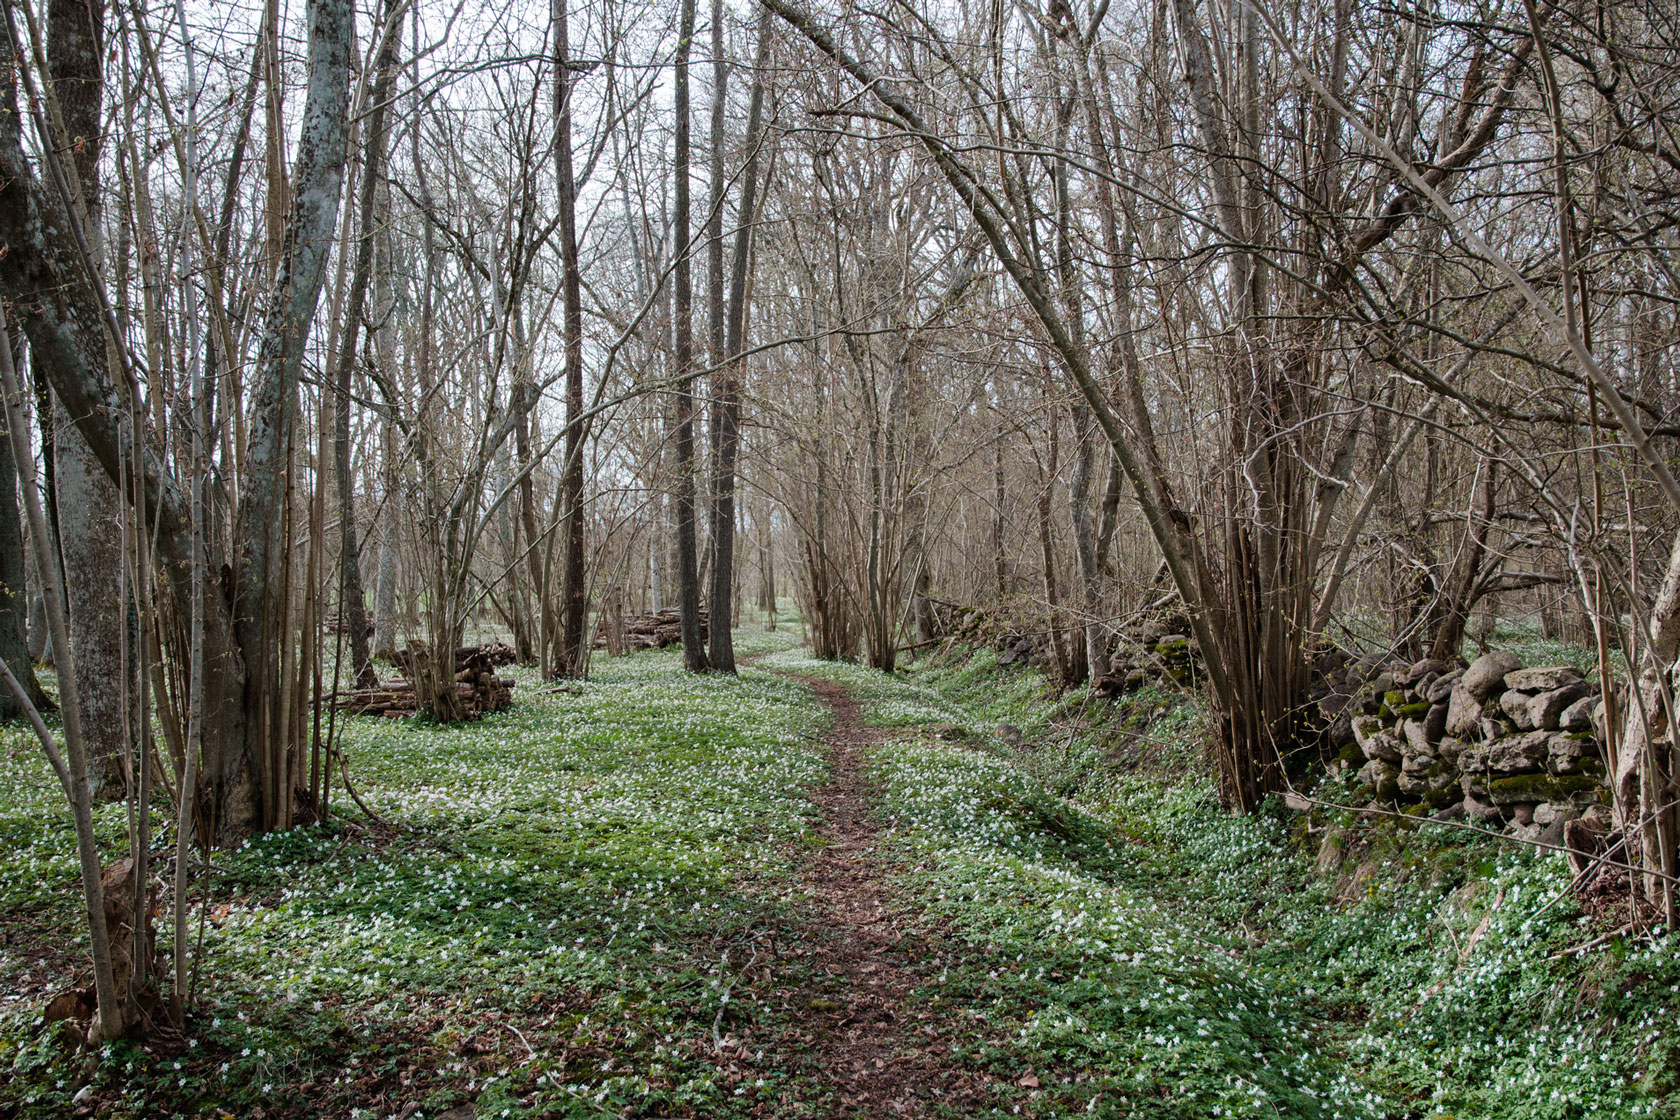 Wood anemones in a forest. 